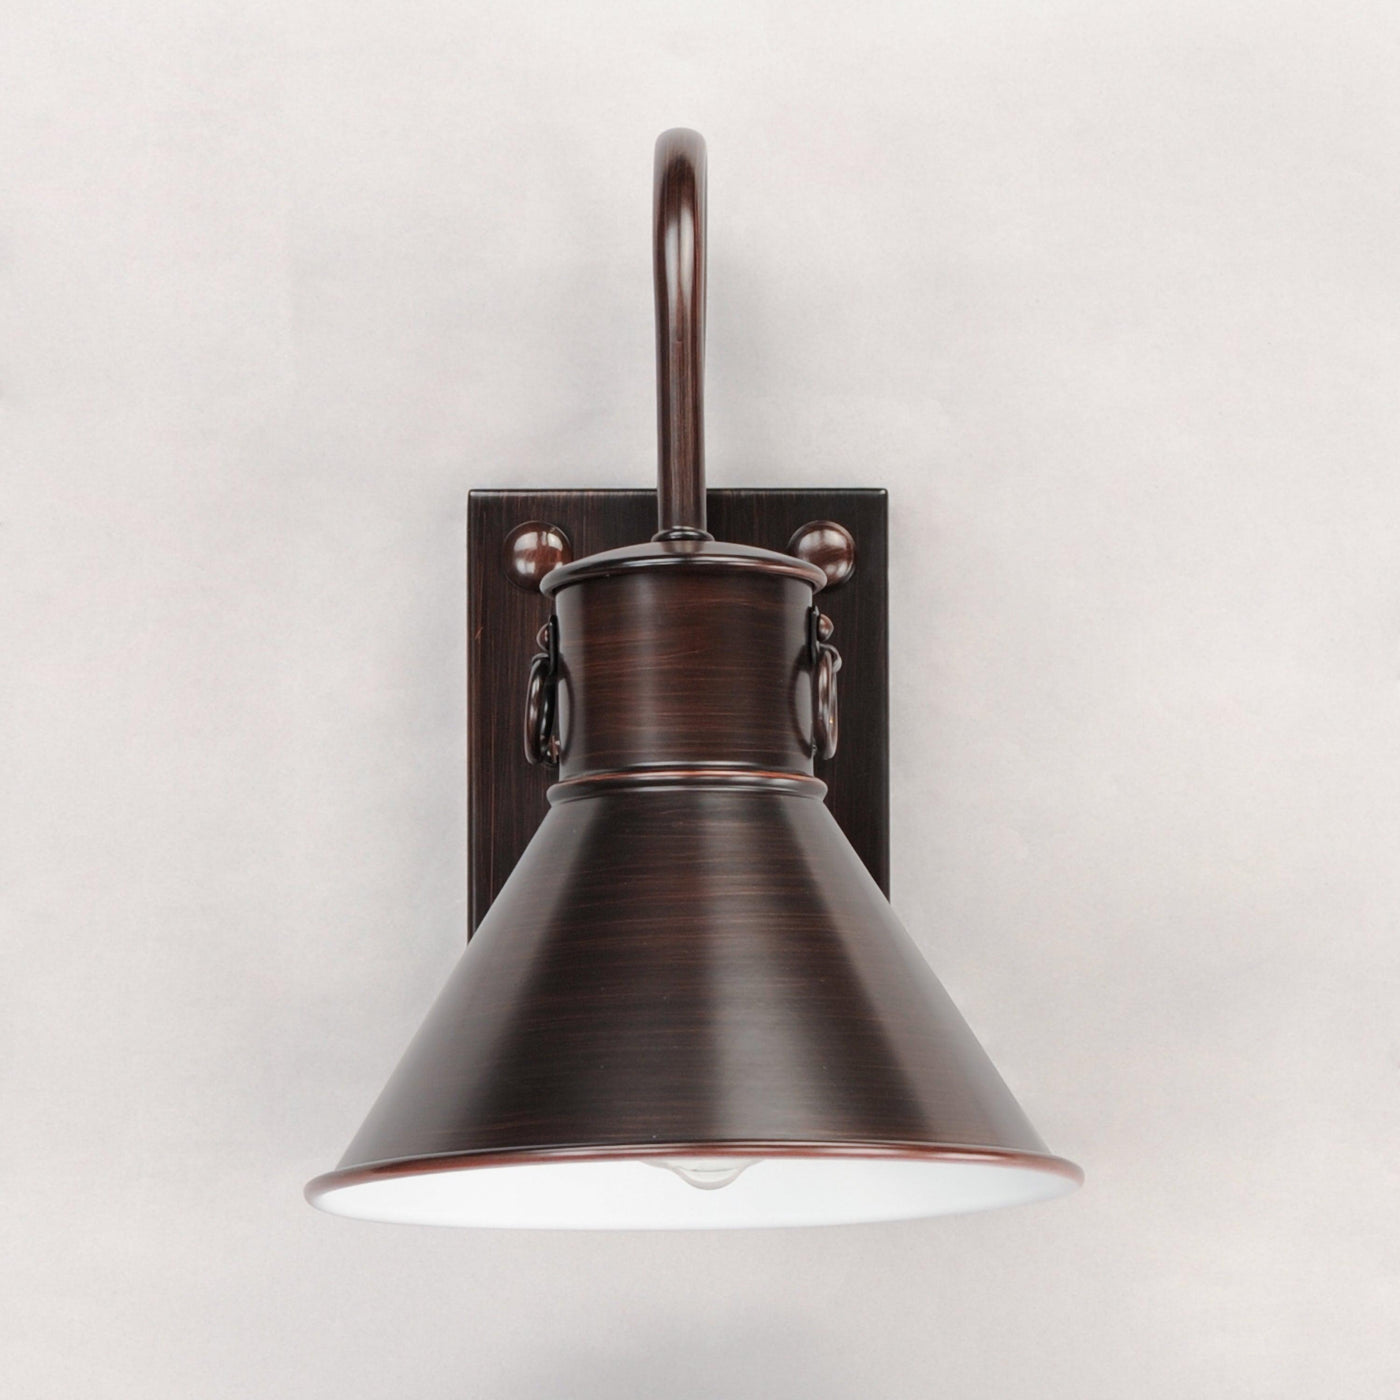 Oriental Bronze Arch Rod with Conical Shade Outdoor Wall Sconce - LV LIGHTING